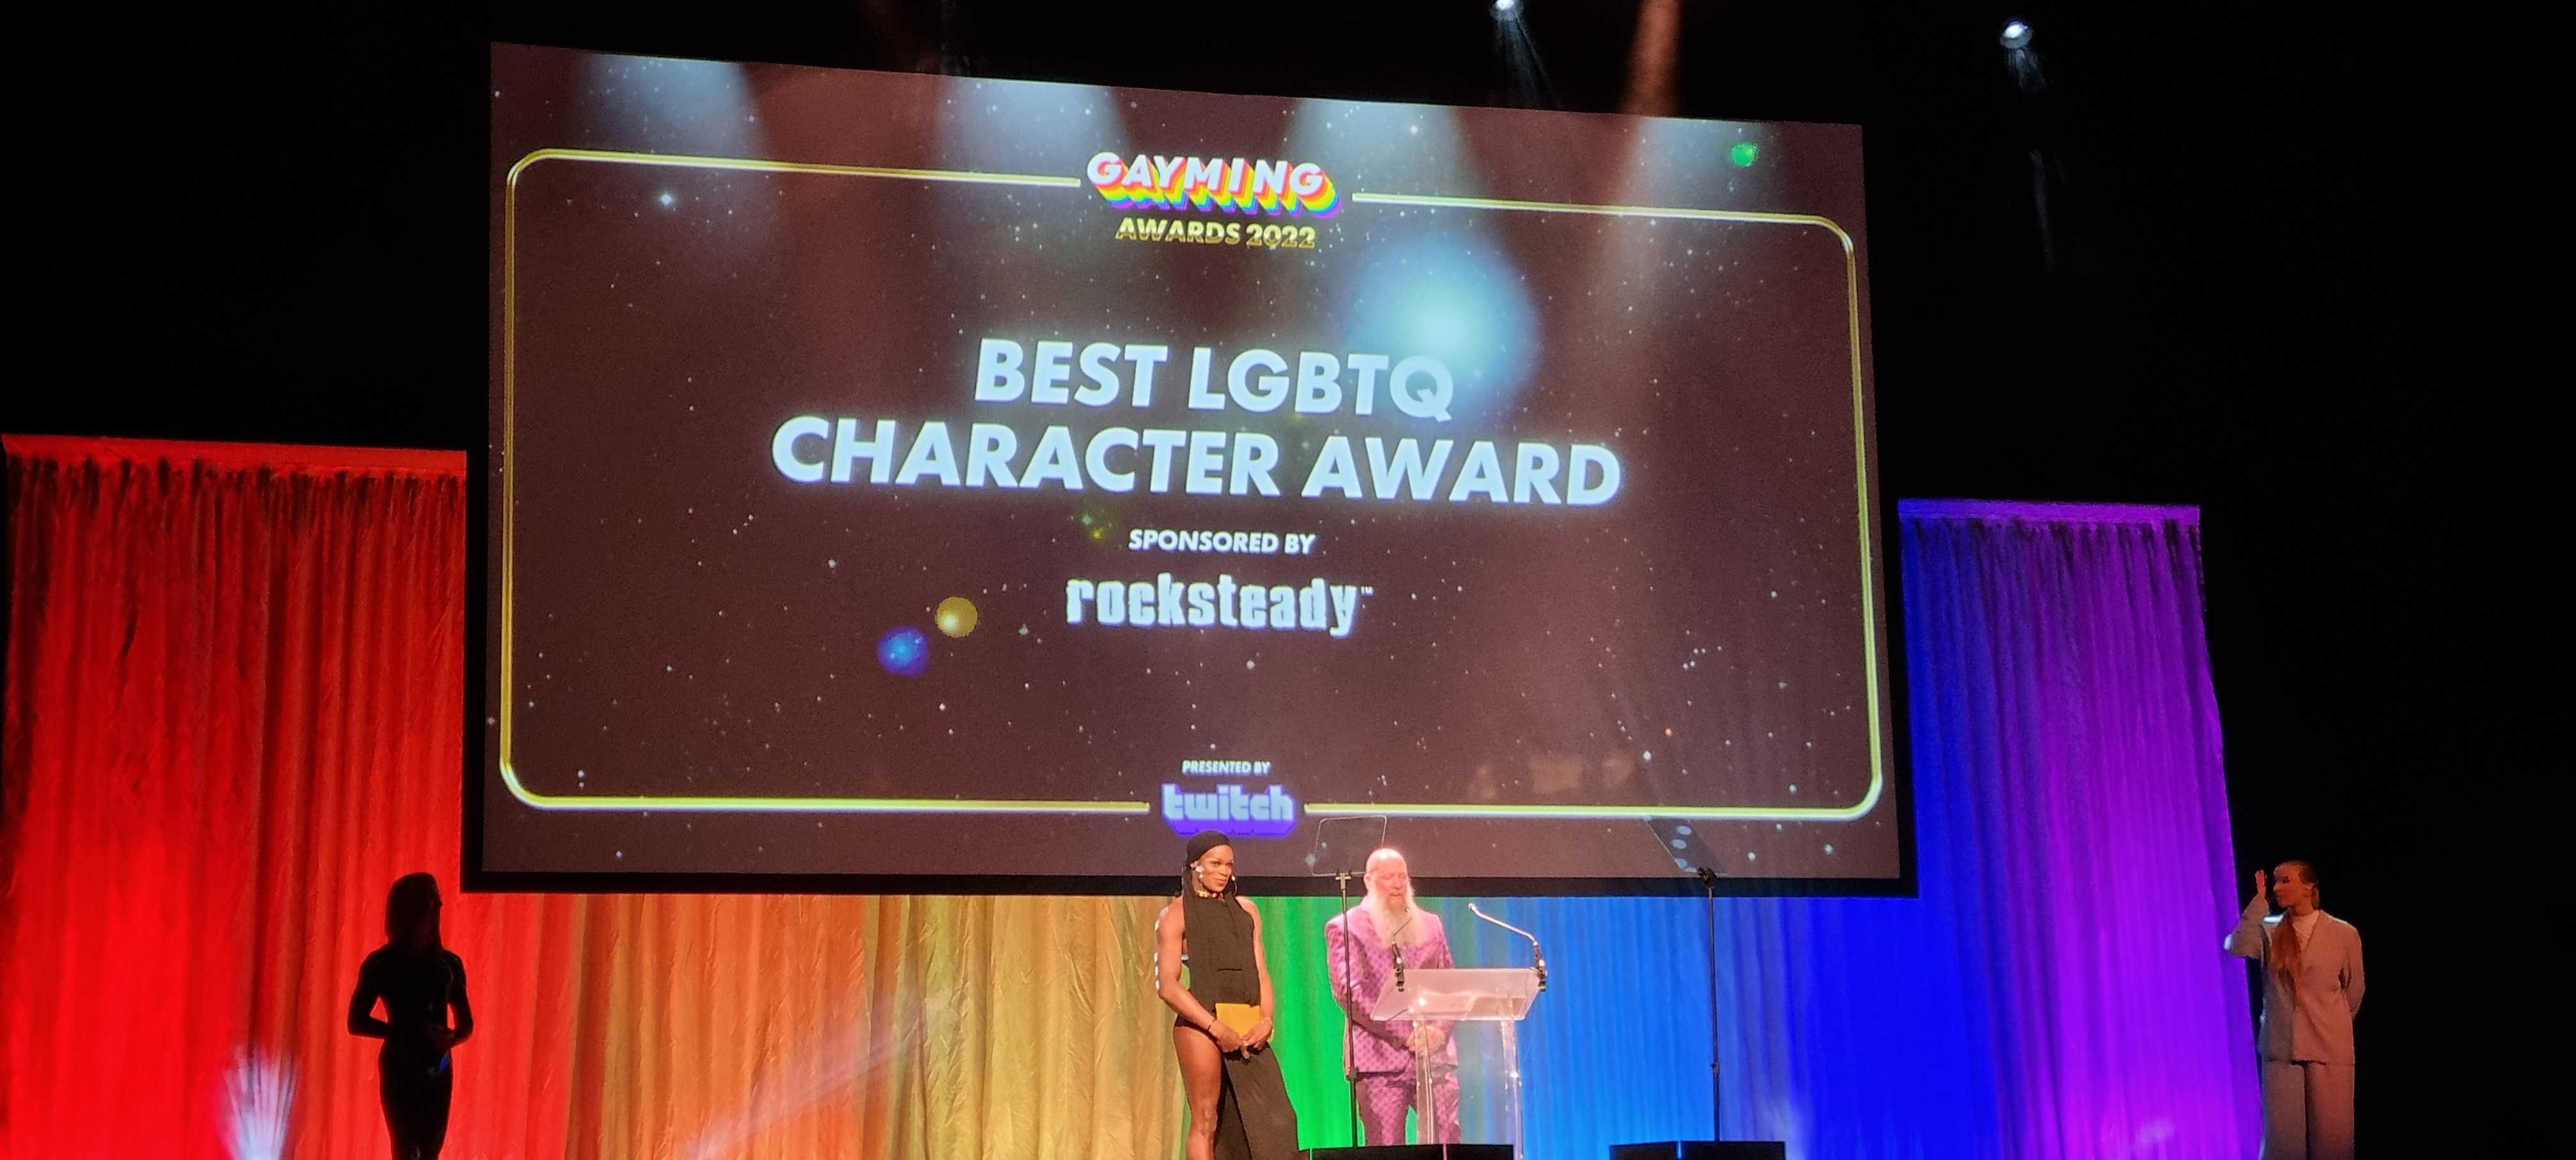 Photo of Rocksteady’s Advanced VFX Artist, Hanno Hinkelbein, on stage to present the Best LGBTQ Character Award for the Gayming Awards 2022.